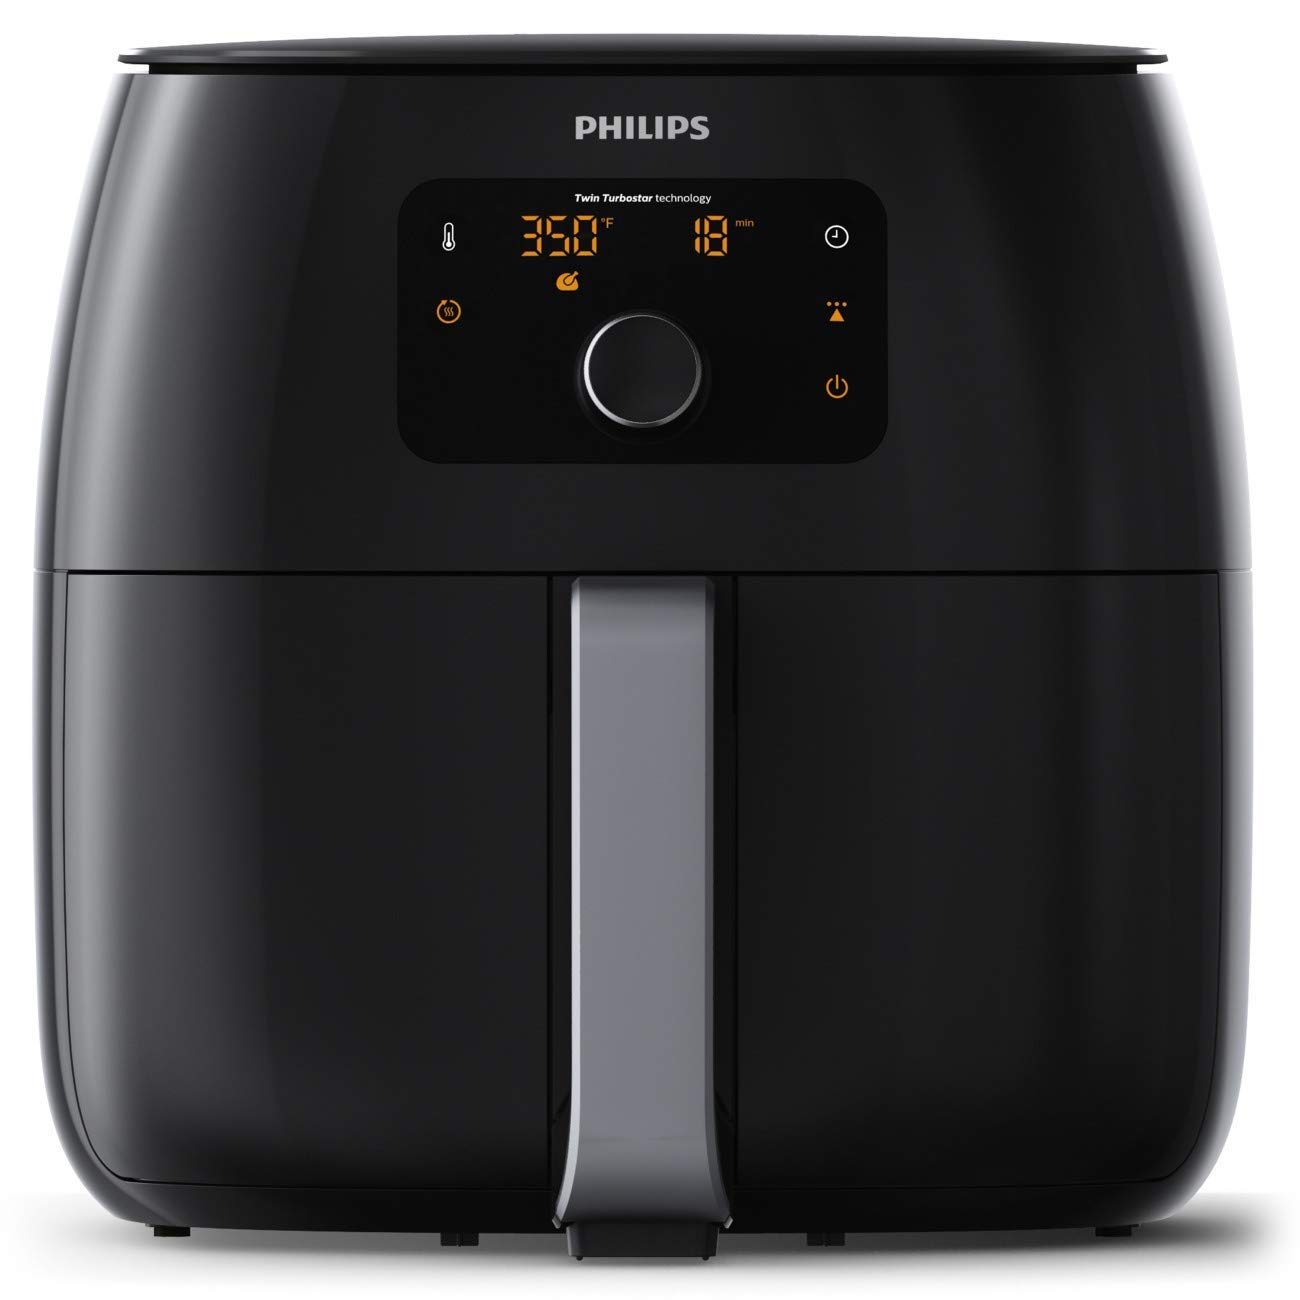 You are currently viewing Philips Twin TurboStar Technology XXL Airfryer with Fat Reducer, Digital Interface 3lb/4qt- HD9650/96